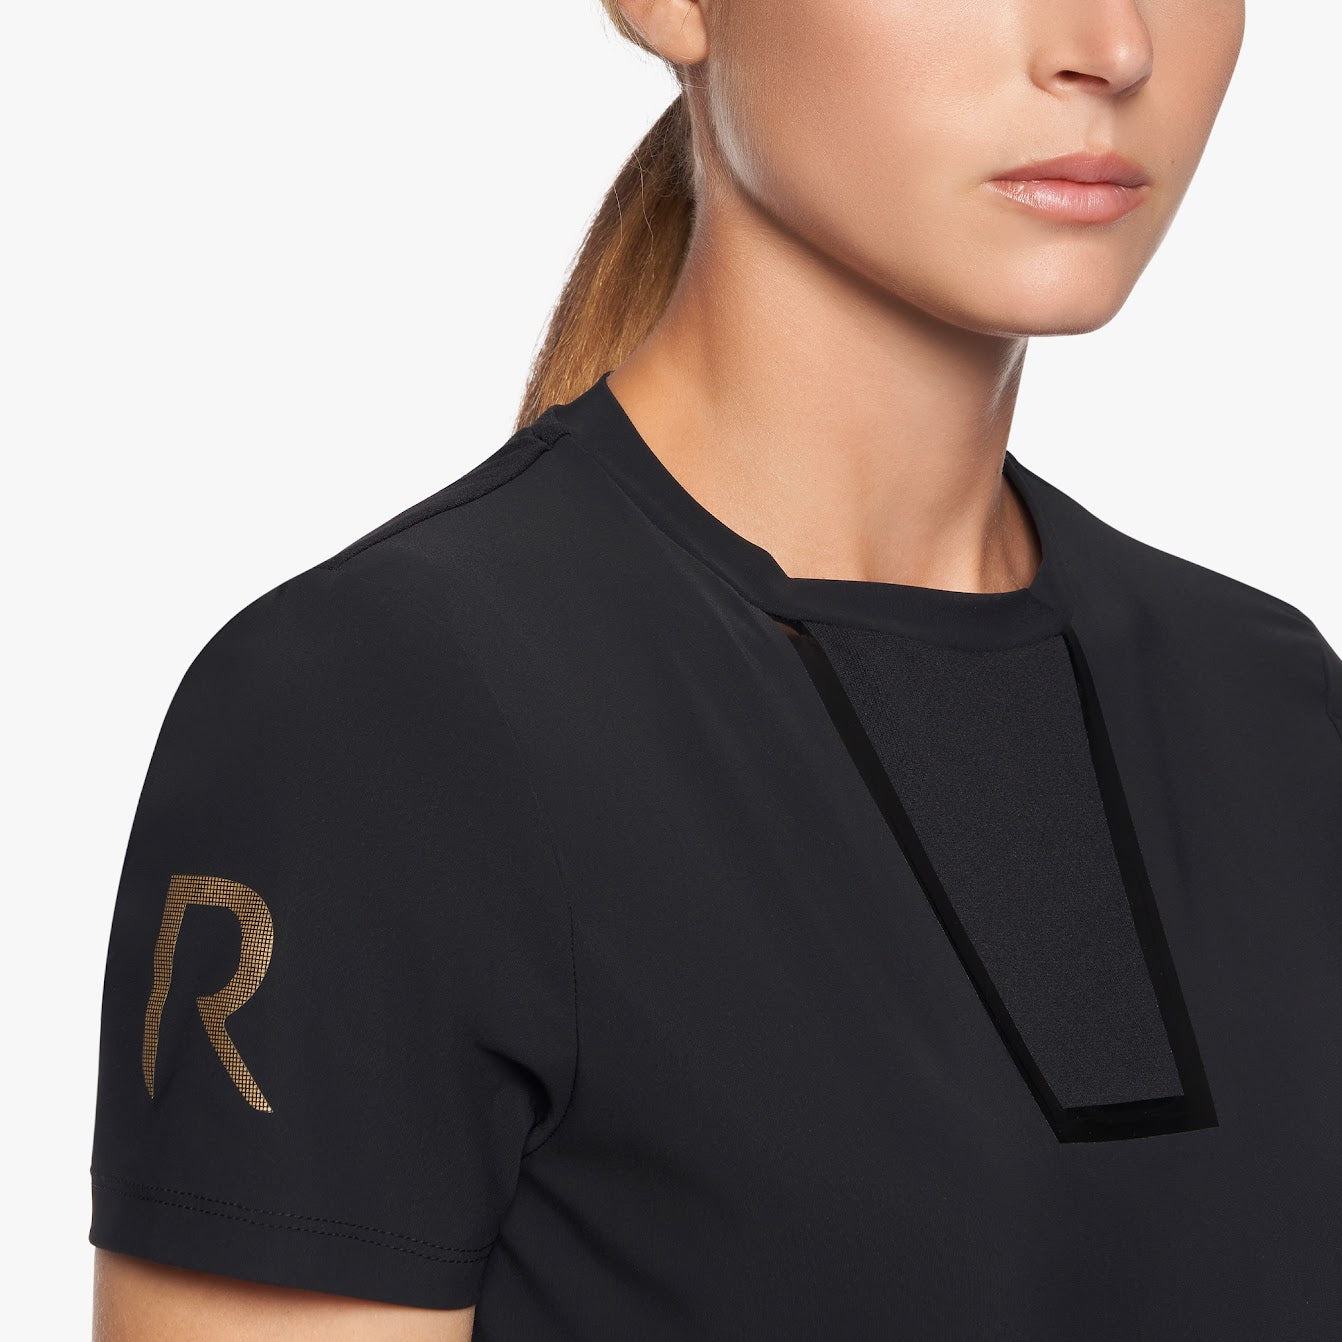 The Cavalleria Toscana Black S/S Revo Premier Jersey Tech Knit T Shirt. Tech knit back for maximum freedom of movement and breathability.  the iconic CT Revo t shirt in gold on the sleeve. 